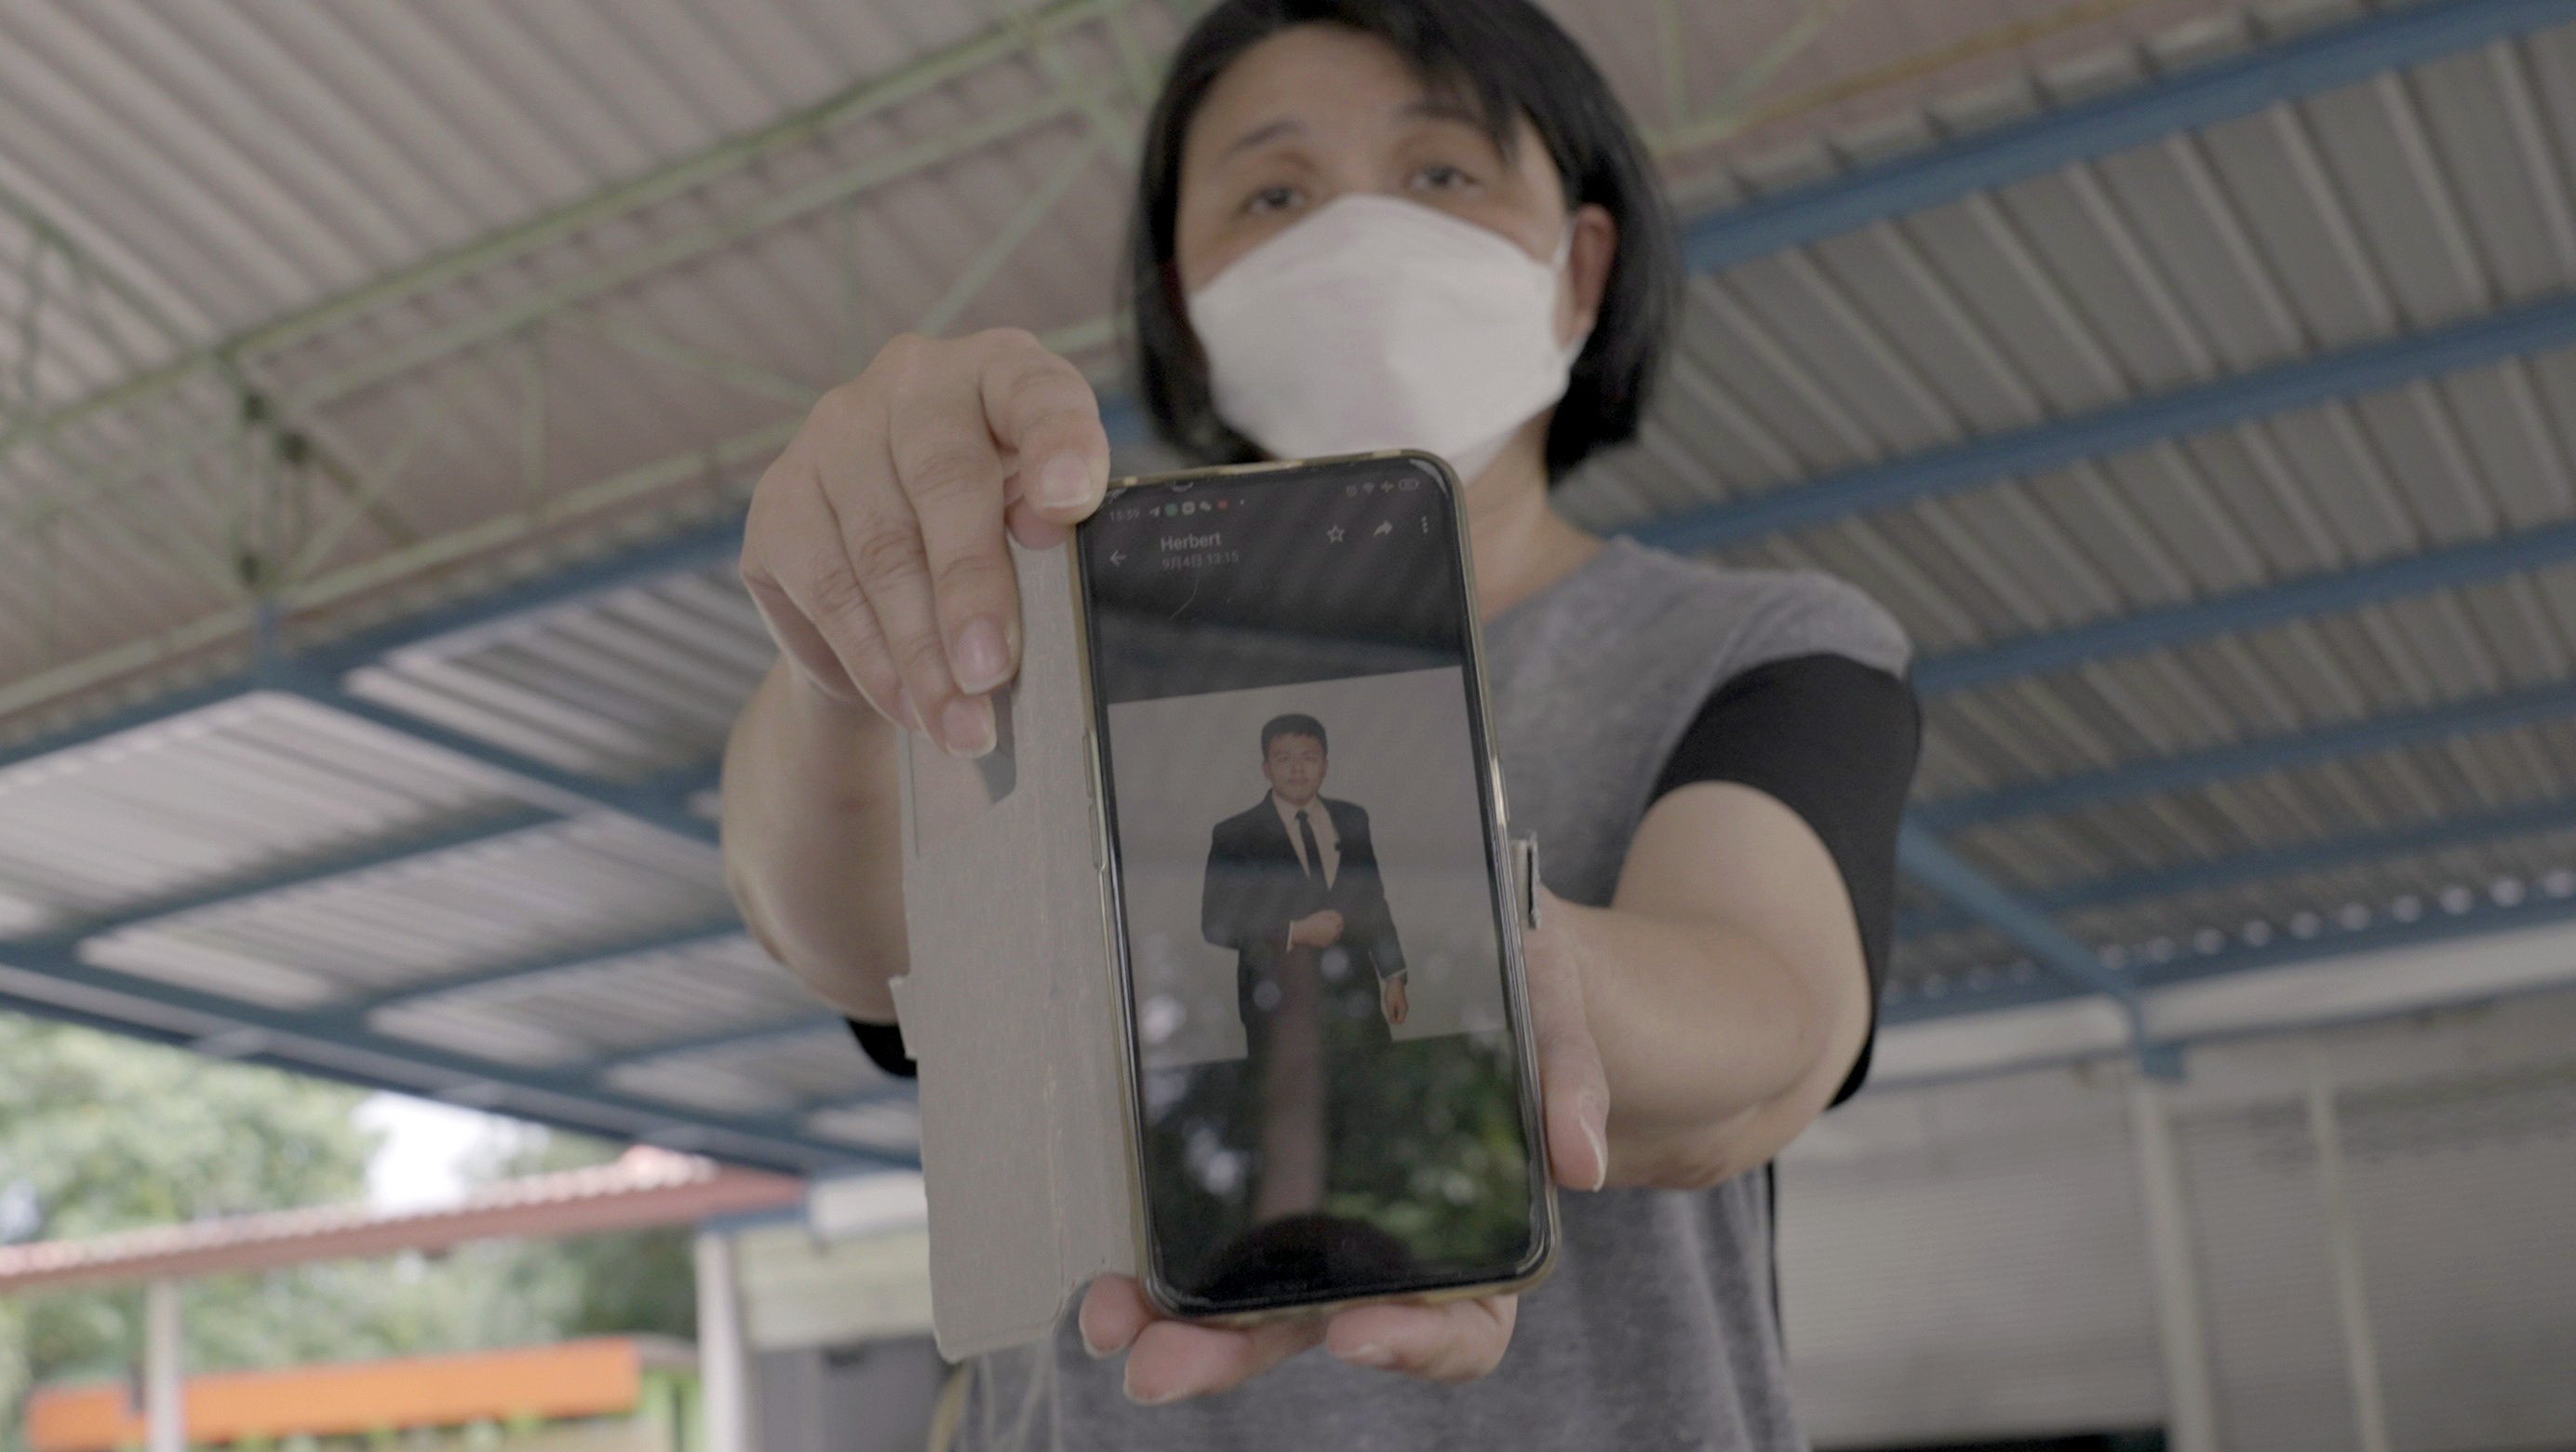 Malaysian Yang Fei Pin holds her phone showing a photograph of her late son Goi Zhen Feng. He died aged 23 in hospital in Thailand near the border with Myanmar, his death thought to be linked to scam gangs. Photo: Aidan Jones 